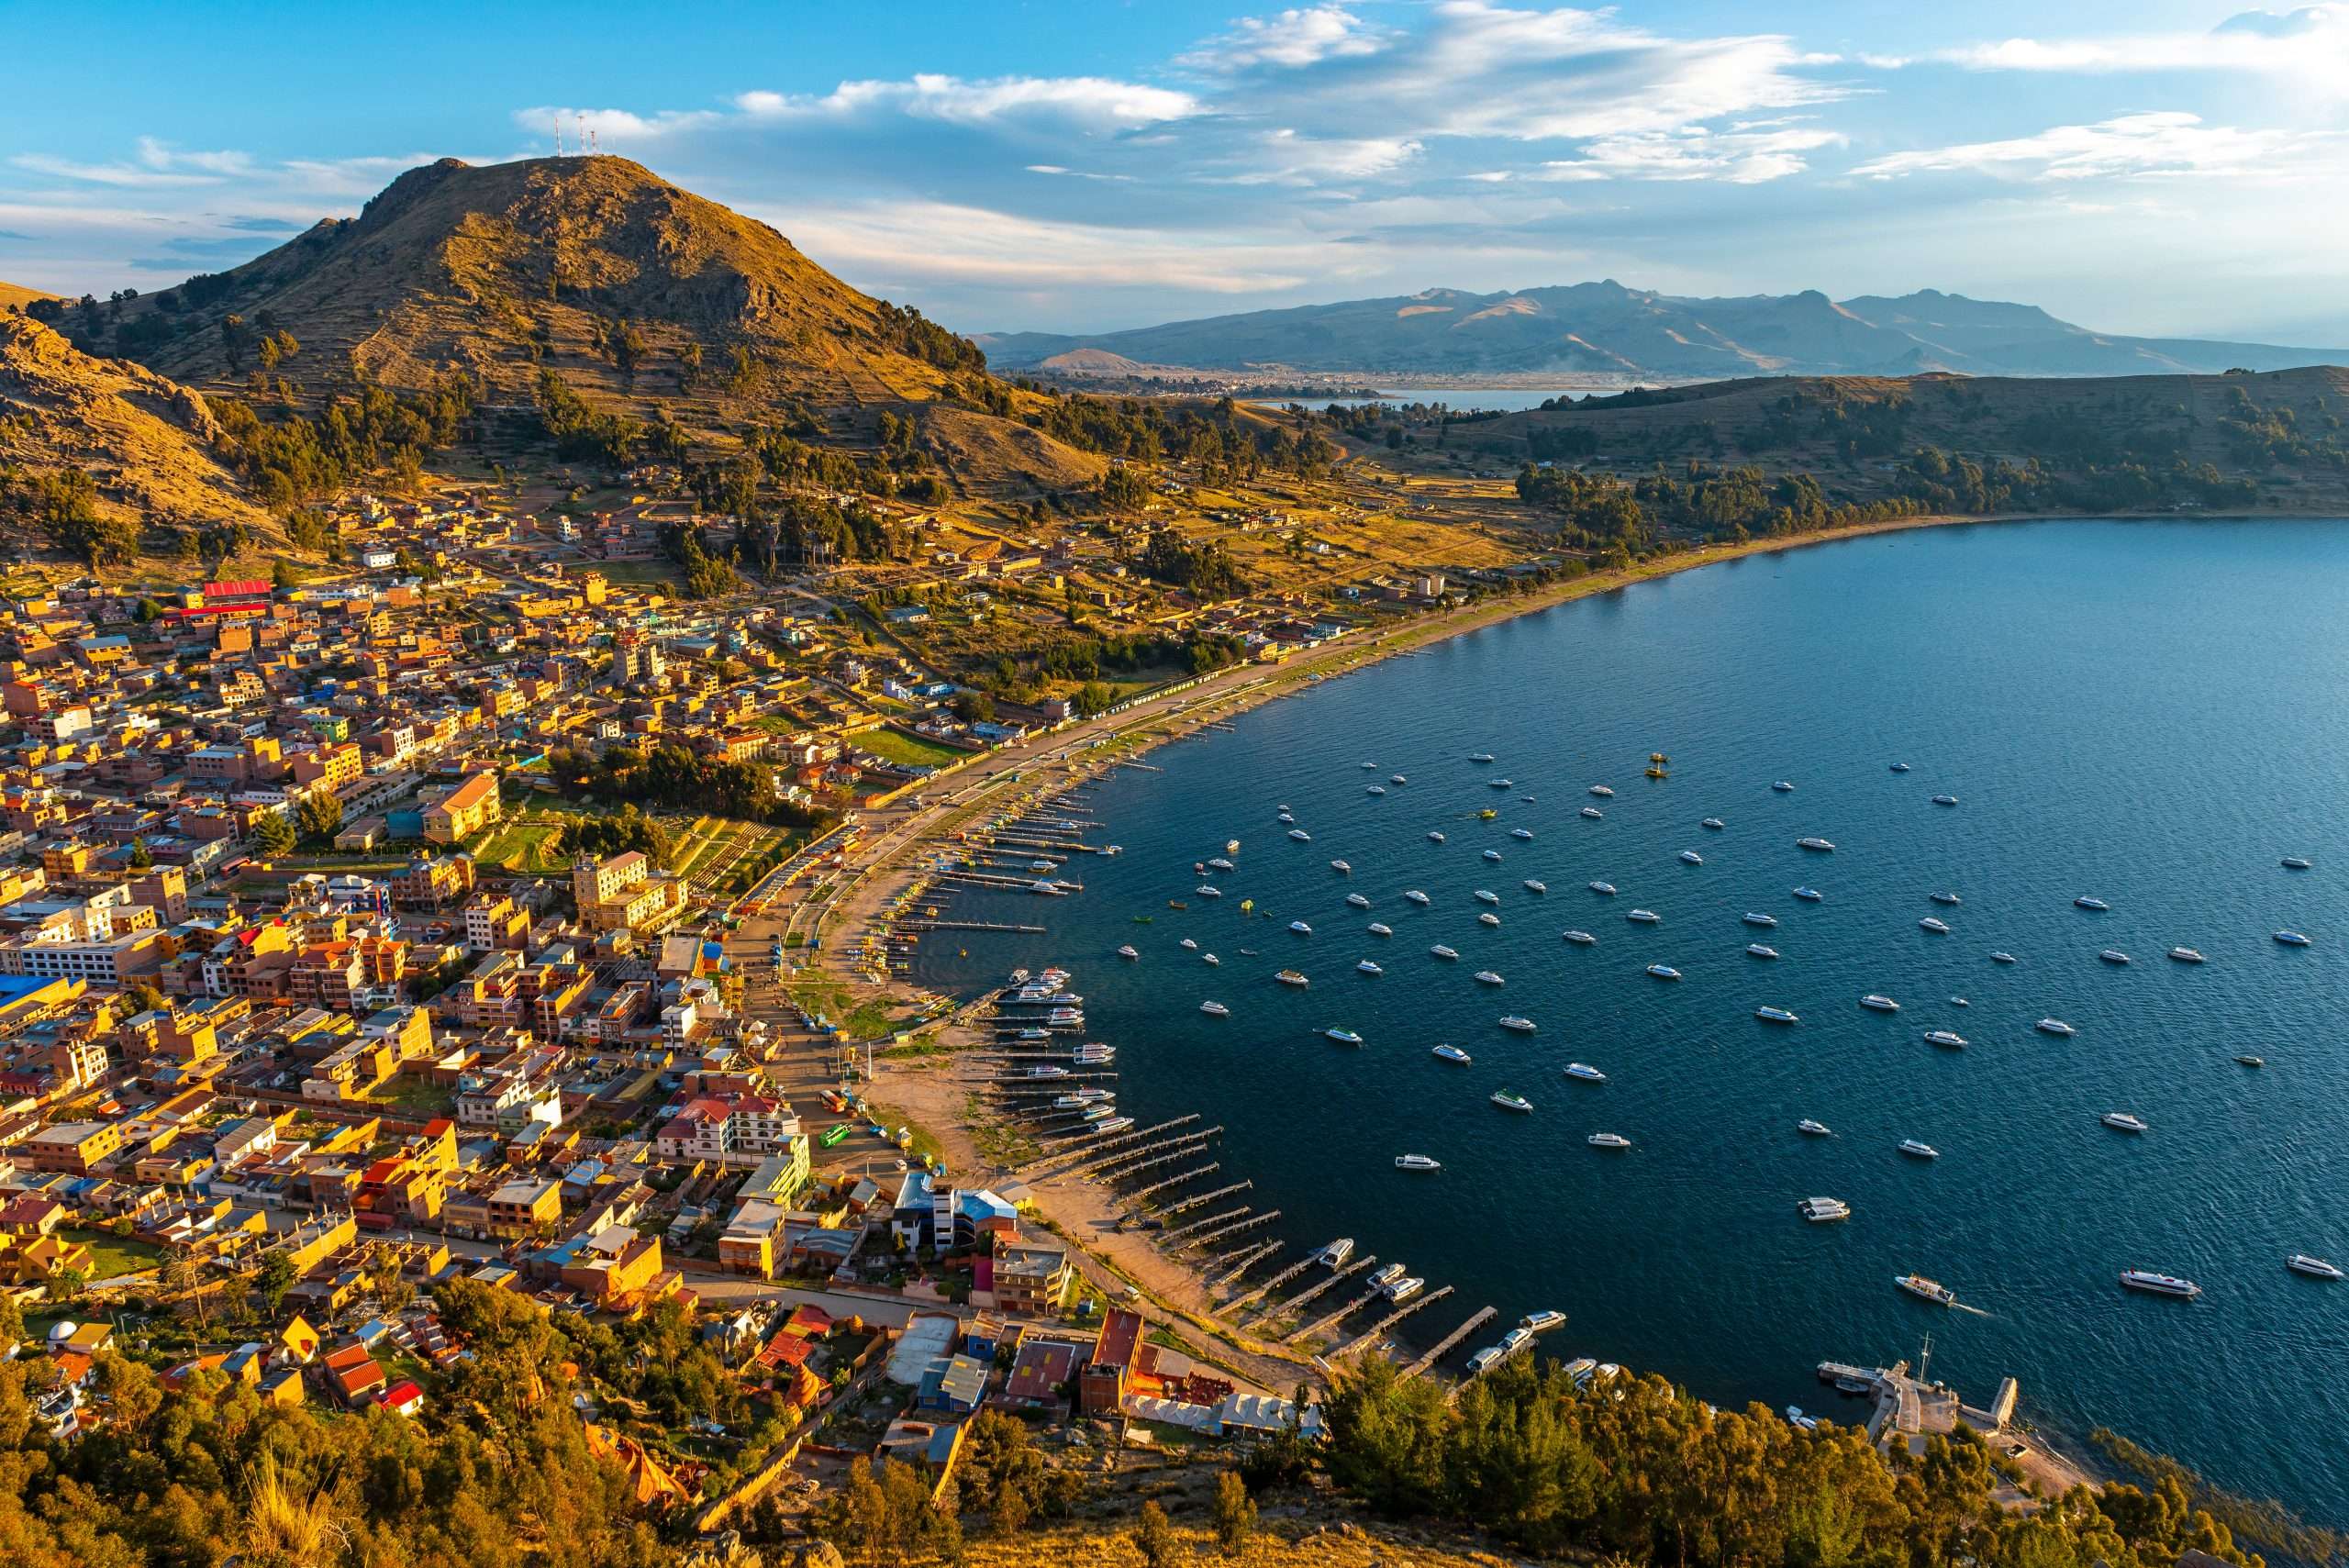 Cityscape of Copacabana city and the Titicaca Lake at sunset, Bolivia.